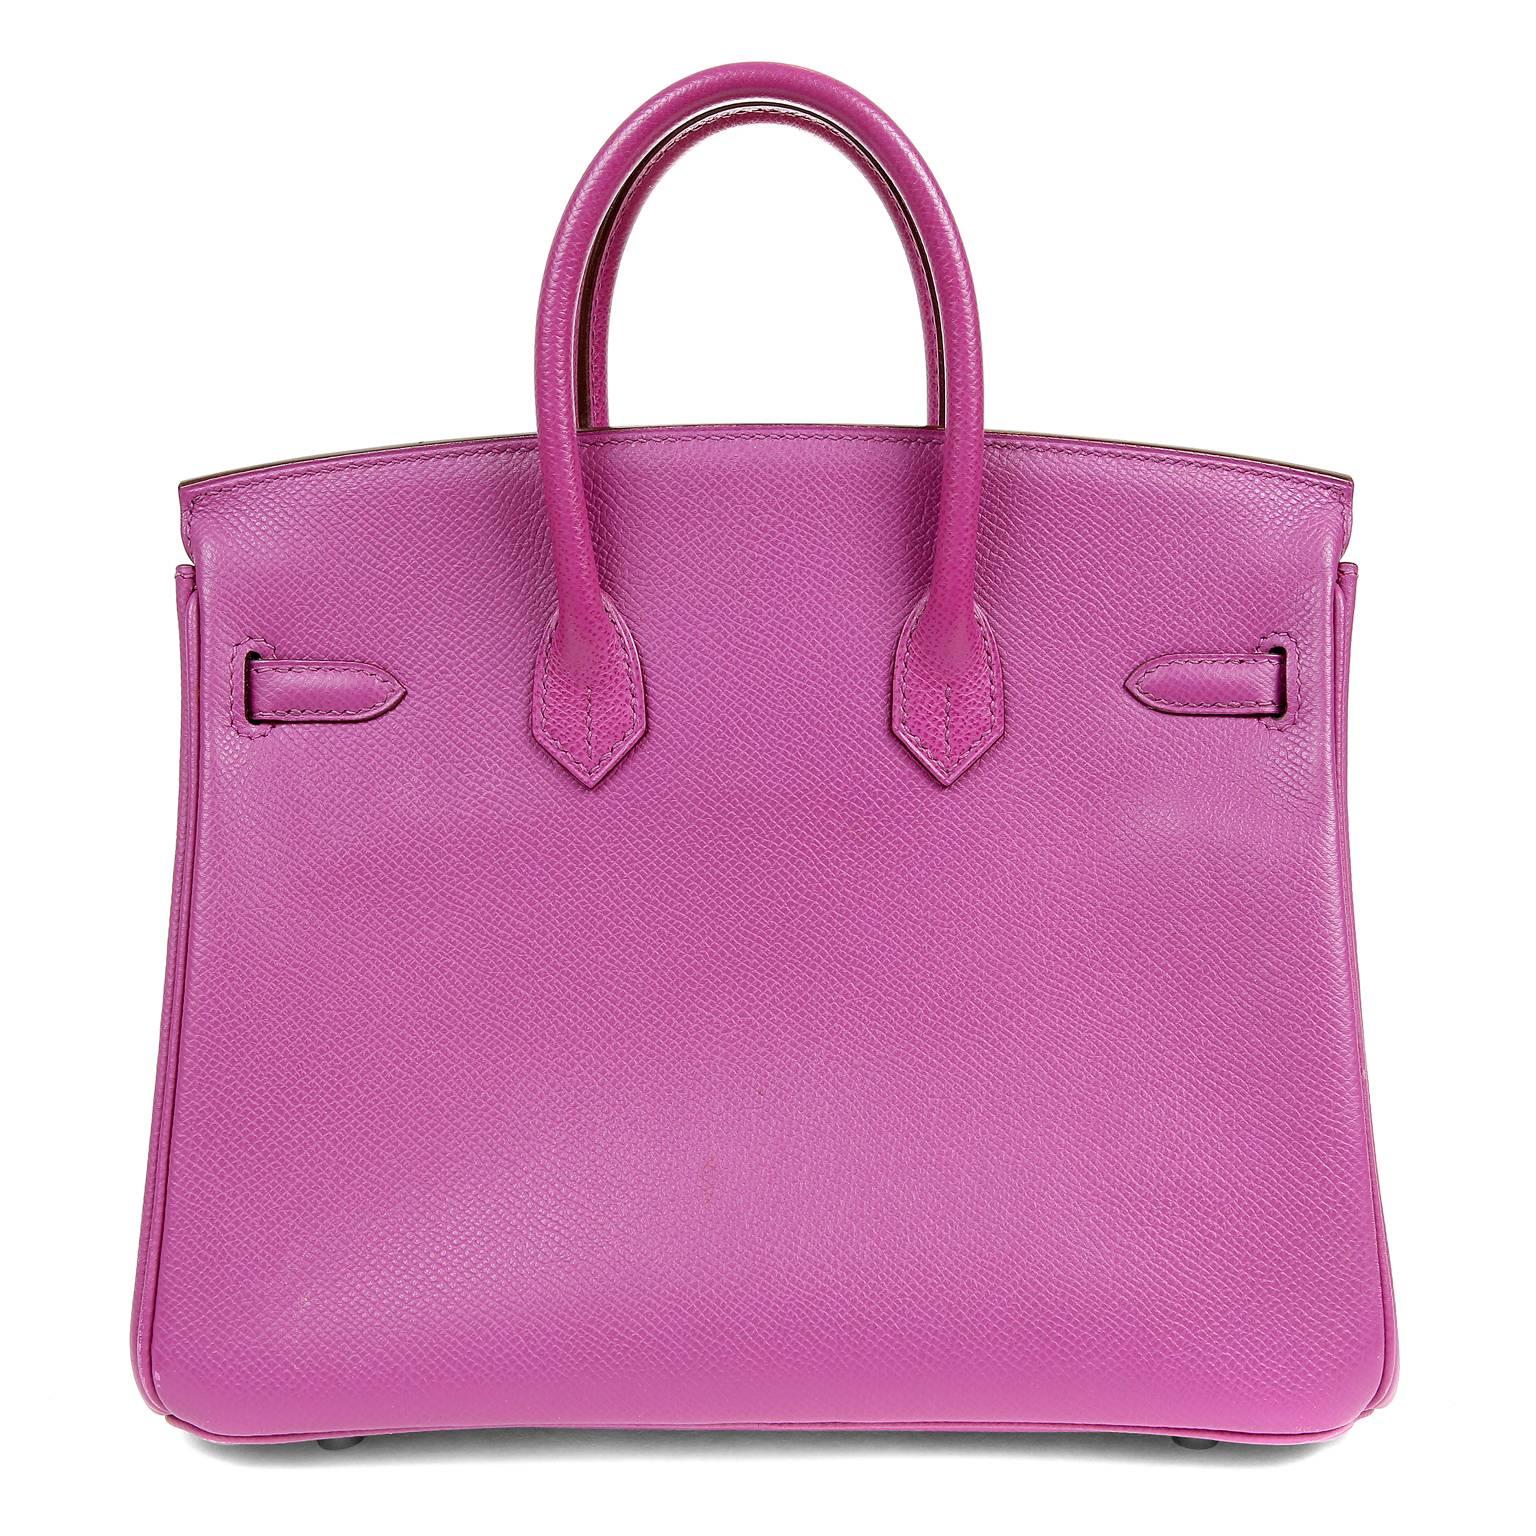 Hermès Anemone Epsom 25 cm Birkin- EXCELLENT condition
  Considered the ultimate luxury item, the Hermès Birkin is stitched by hand. Waitlists are commonplace.   Anemone is a stunning pop color; a must have for purple lovers.

 Epsom leather is